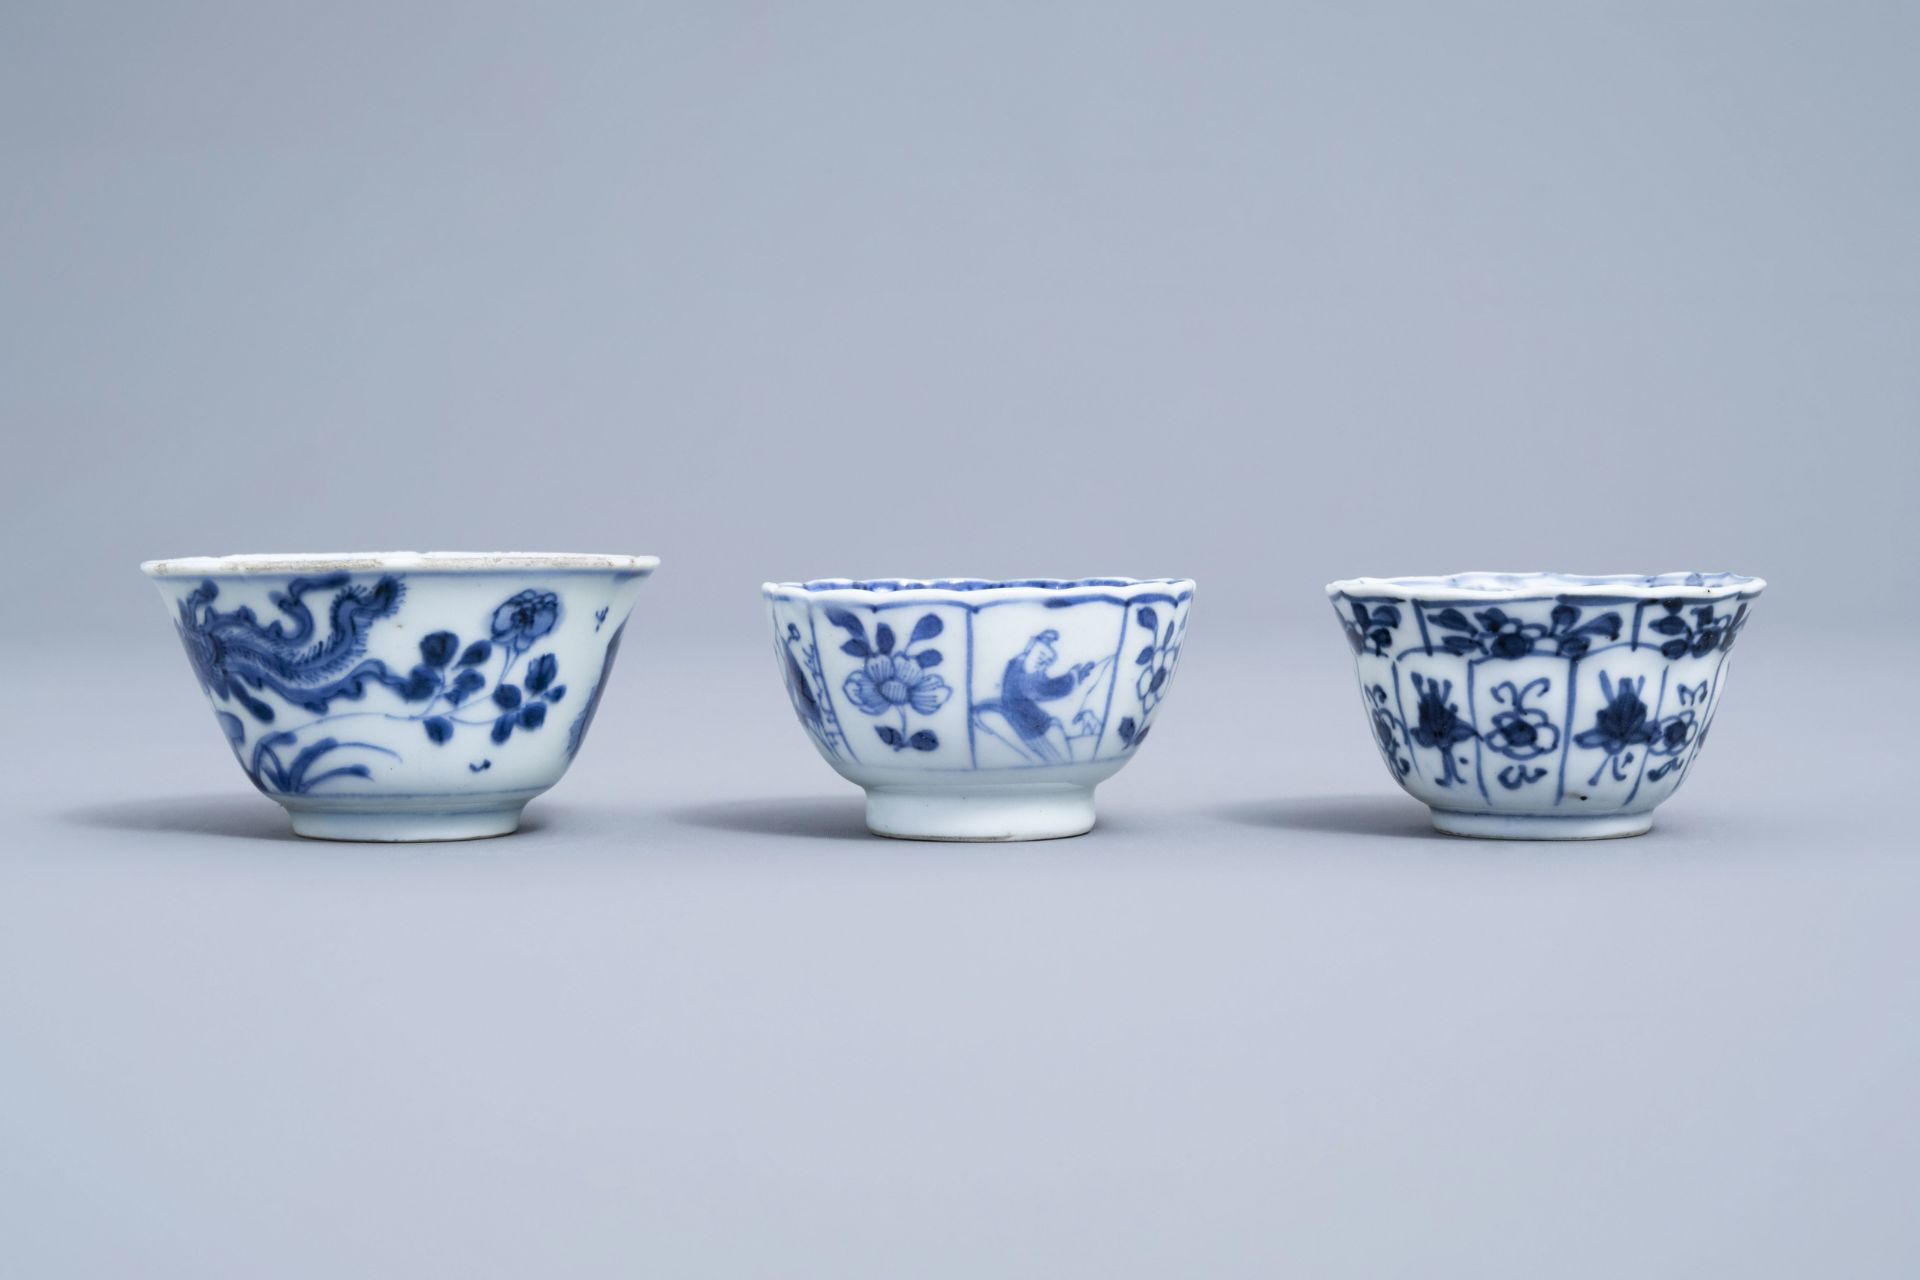 A varied collection of Chinese blue and white porcelain, 18th C. and later - Image 37 of 54